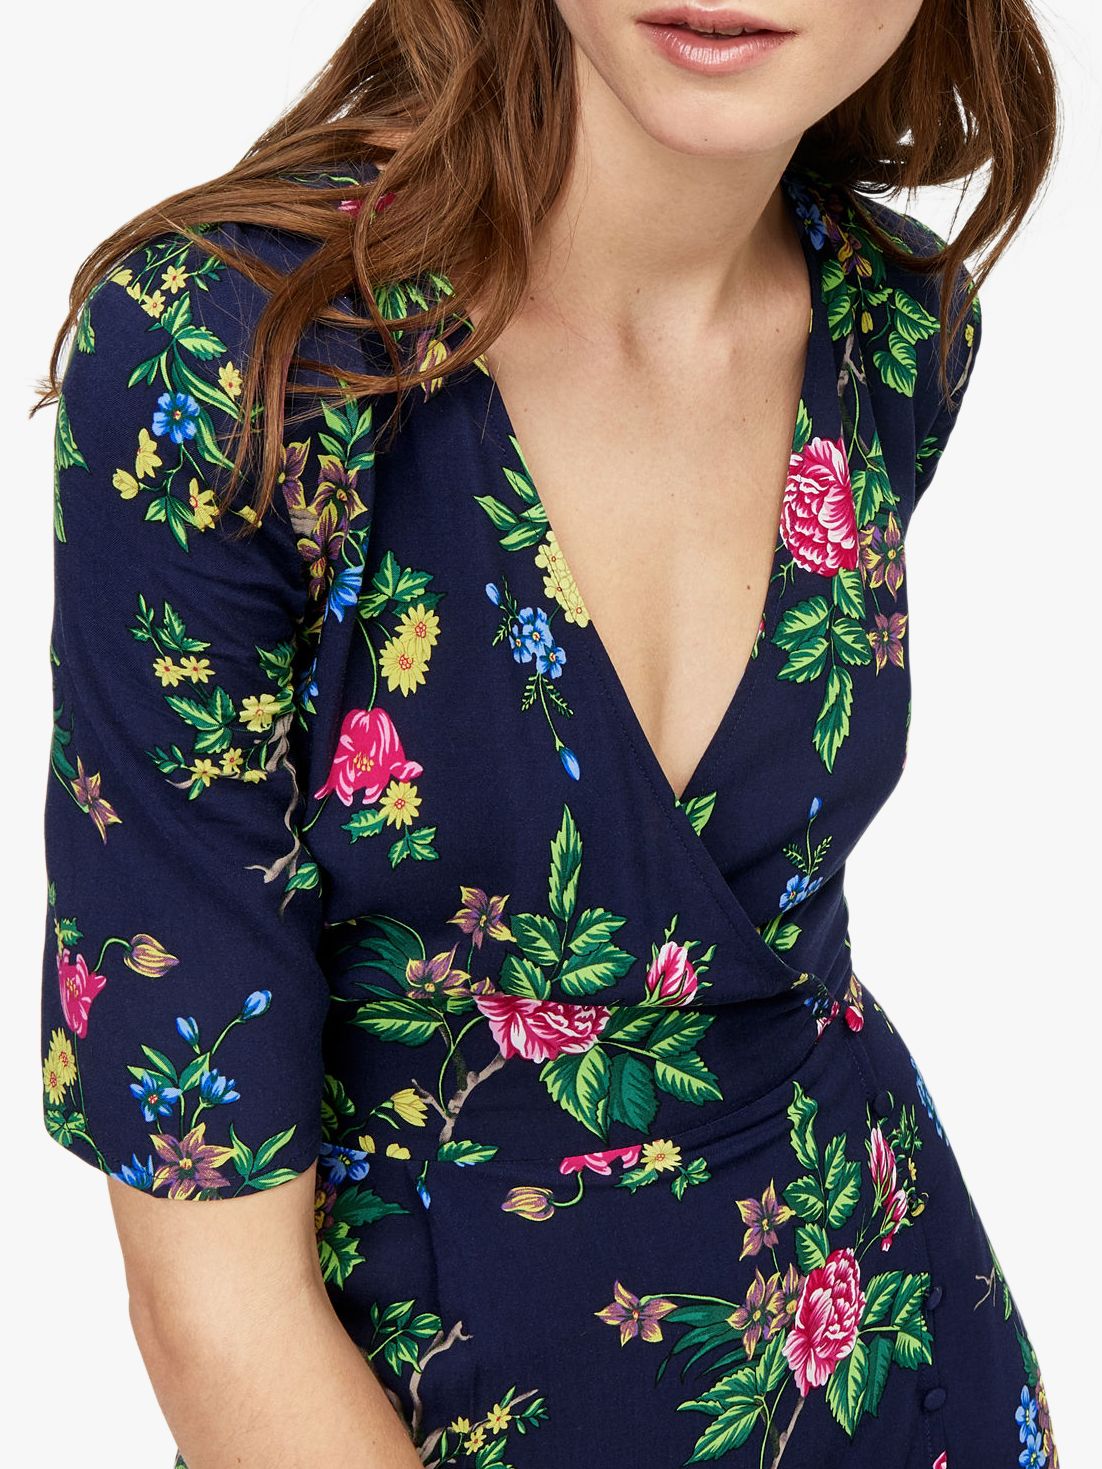 Warehouse Verity Floral Dress Discount, 57% OFF | www.vexi.cat